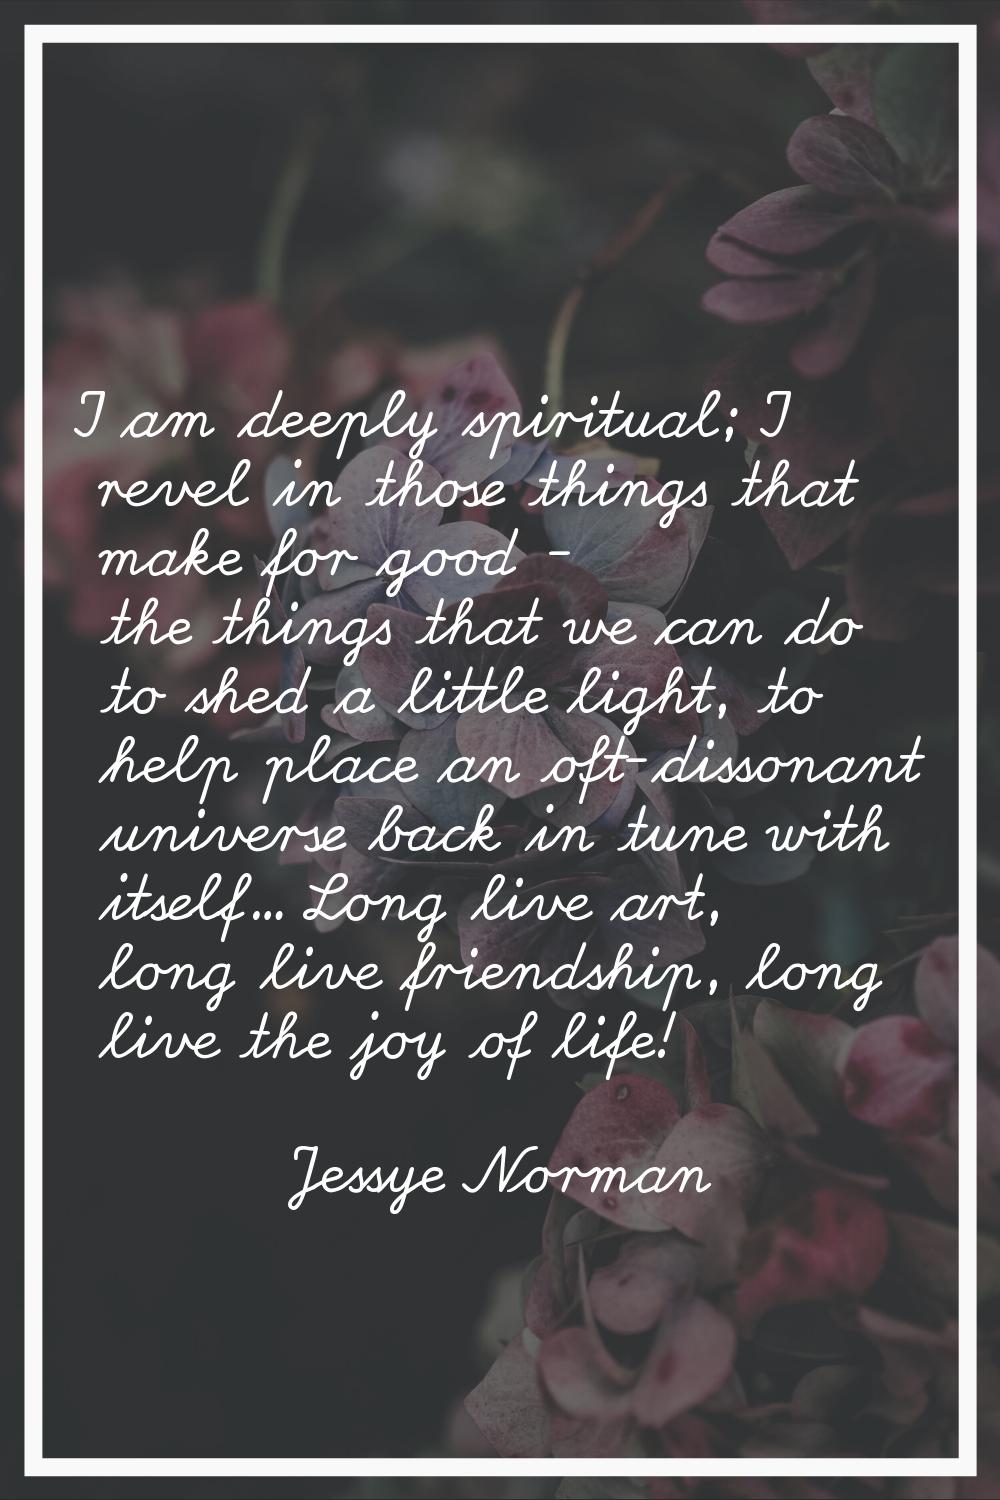 I am deeply spiritual; I revel in those things that make for good - the things that we can do to sh